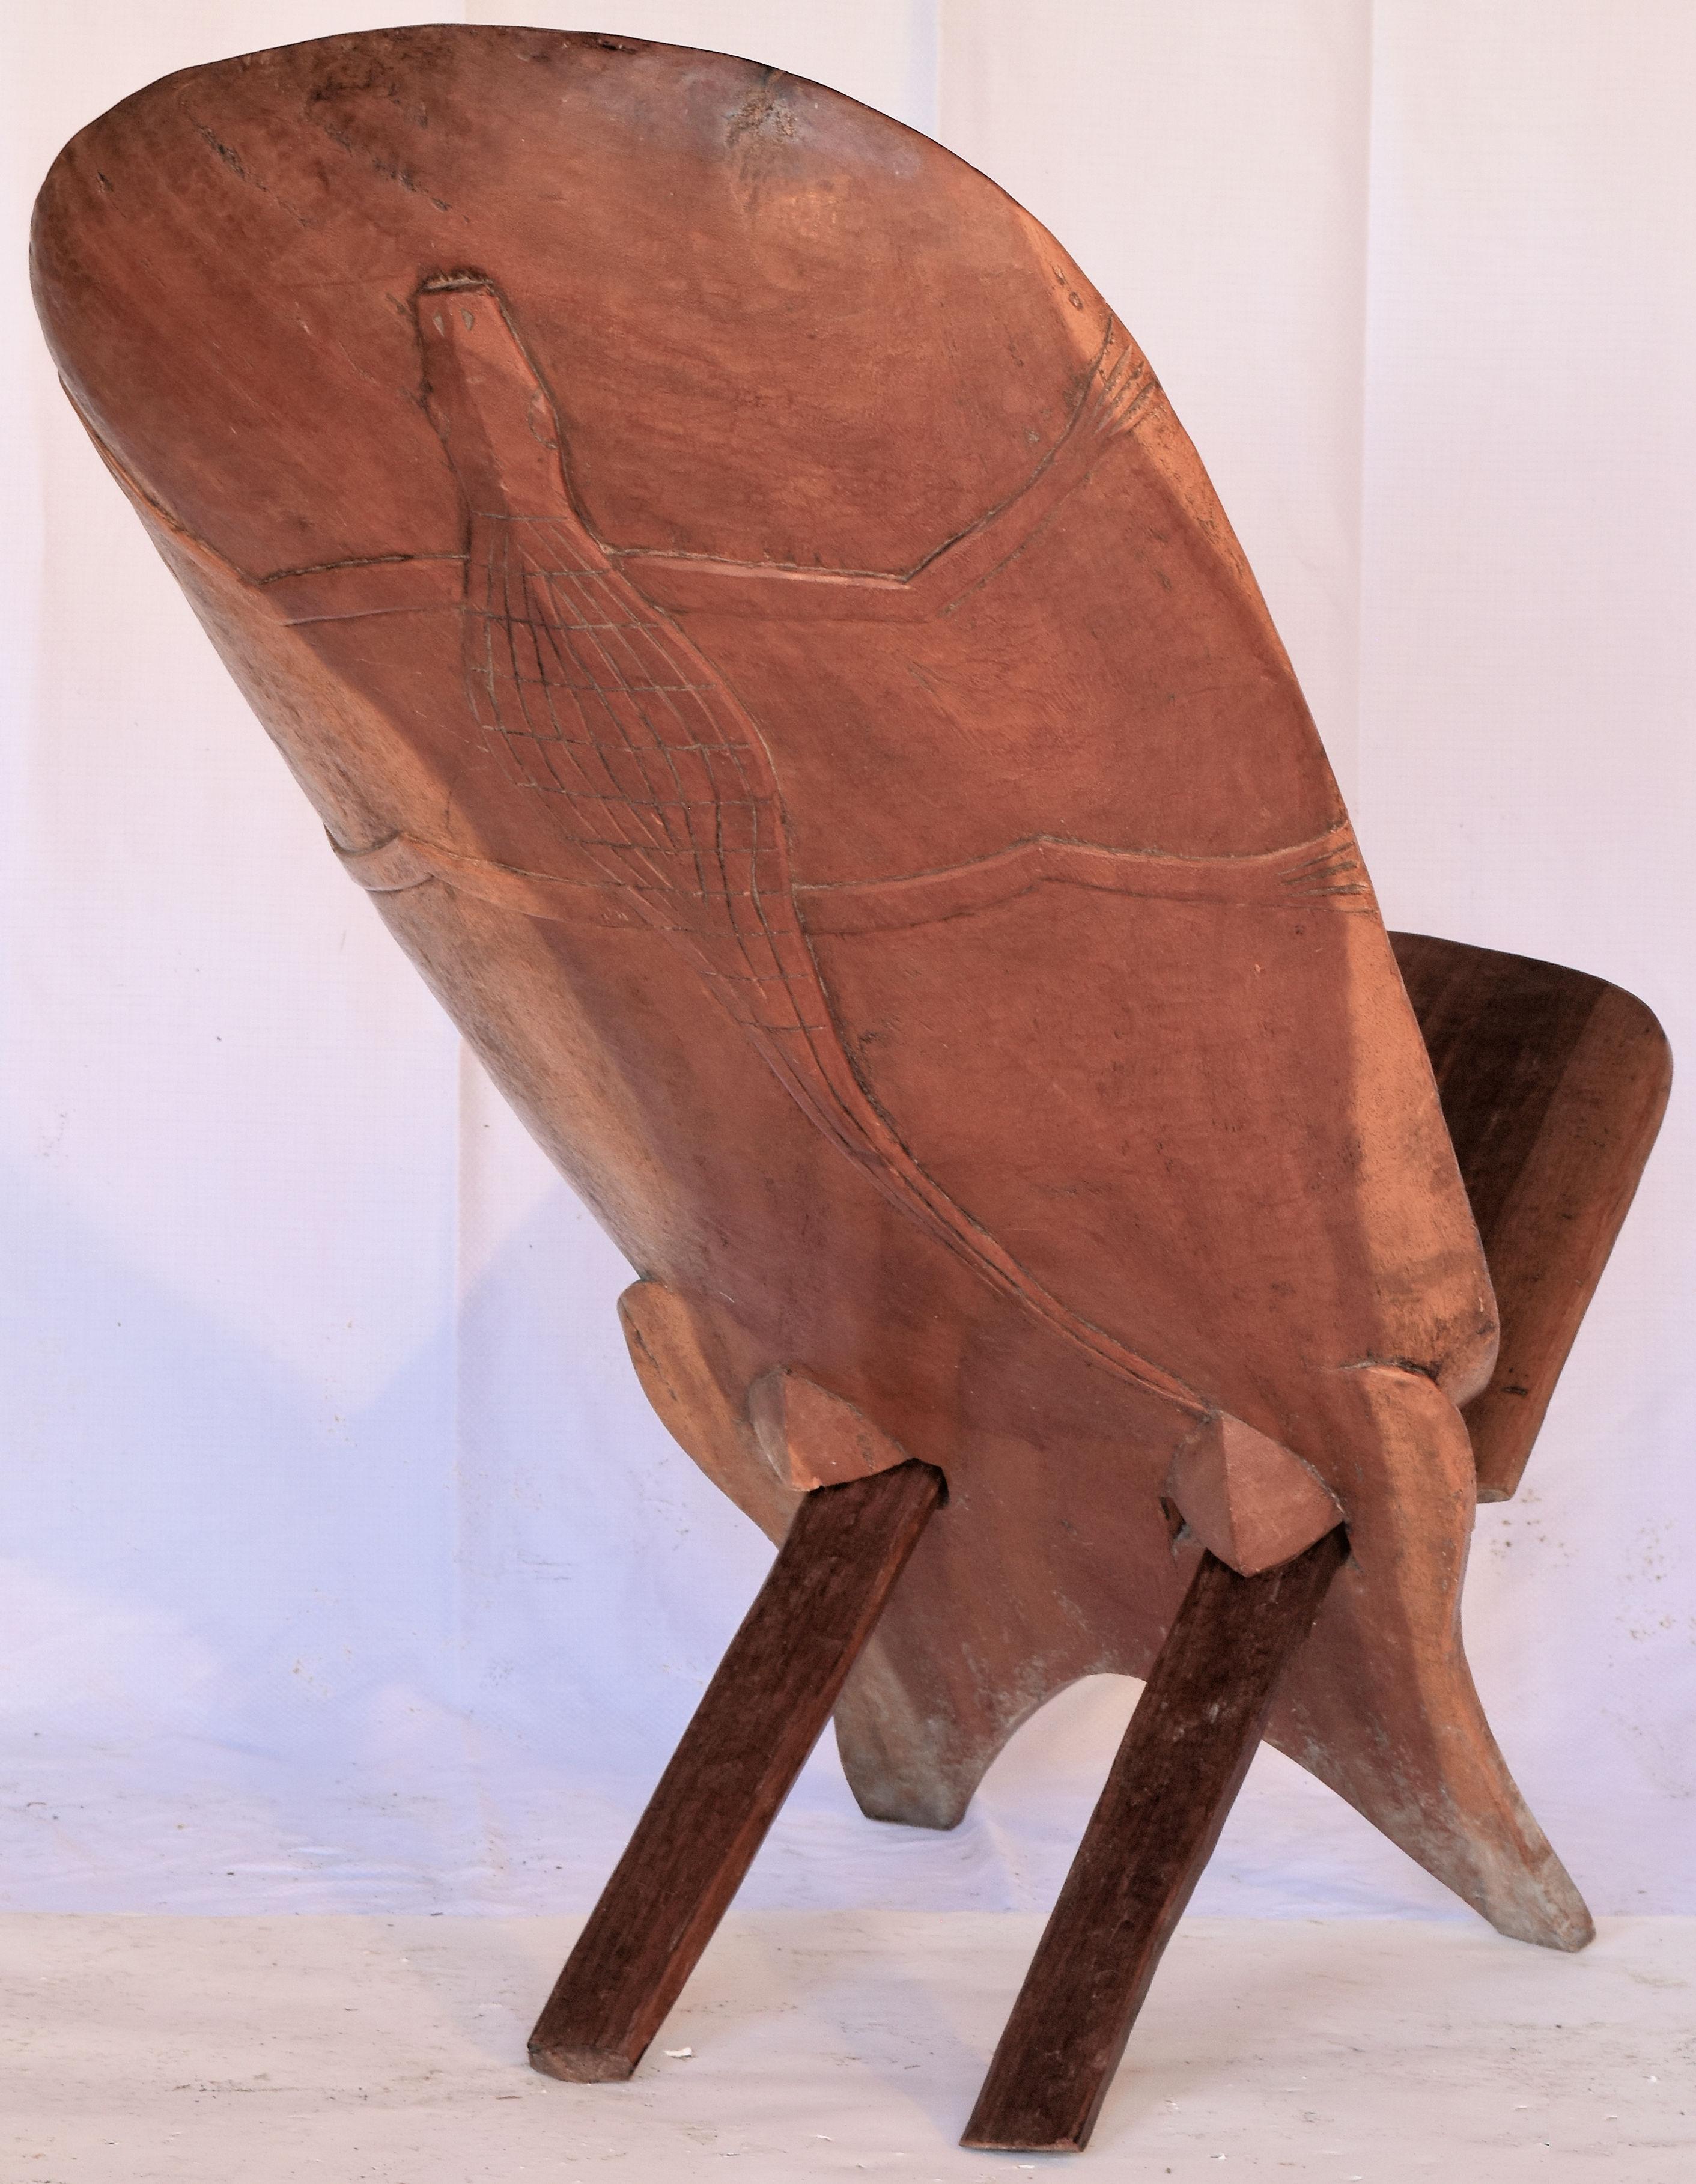 African Hand Carved Wooden Birthing Chair 2 Piece For Sale At 1stdibs